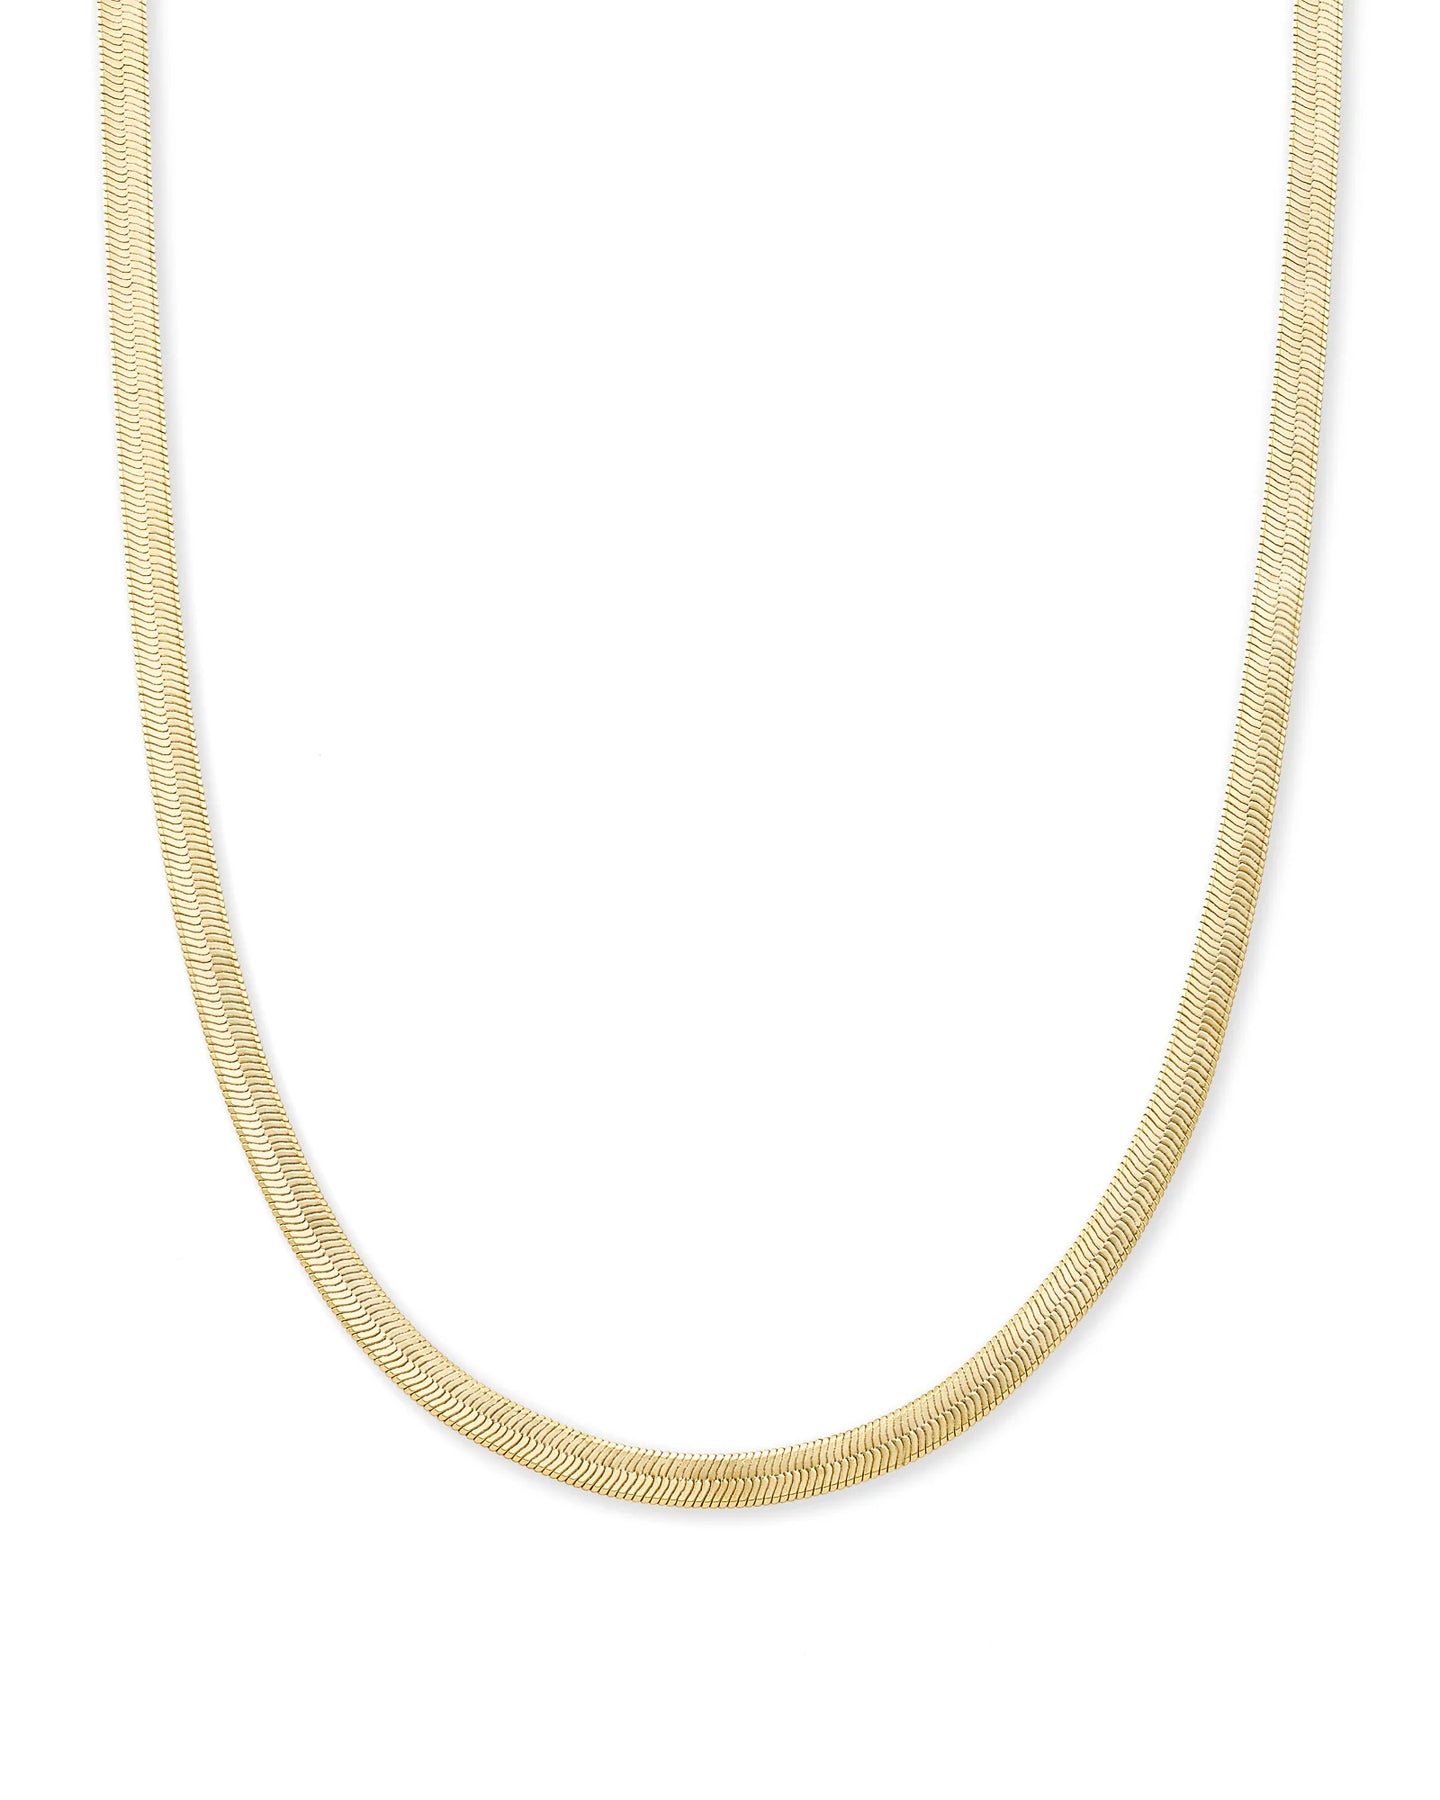 Merrick Chain Necklace in Gold